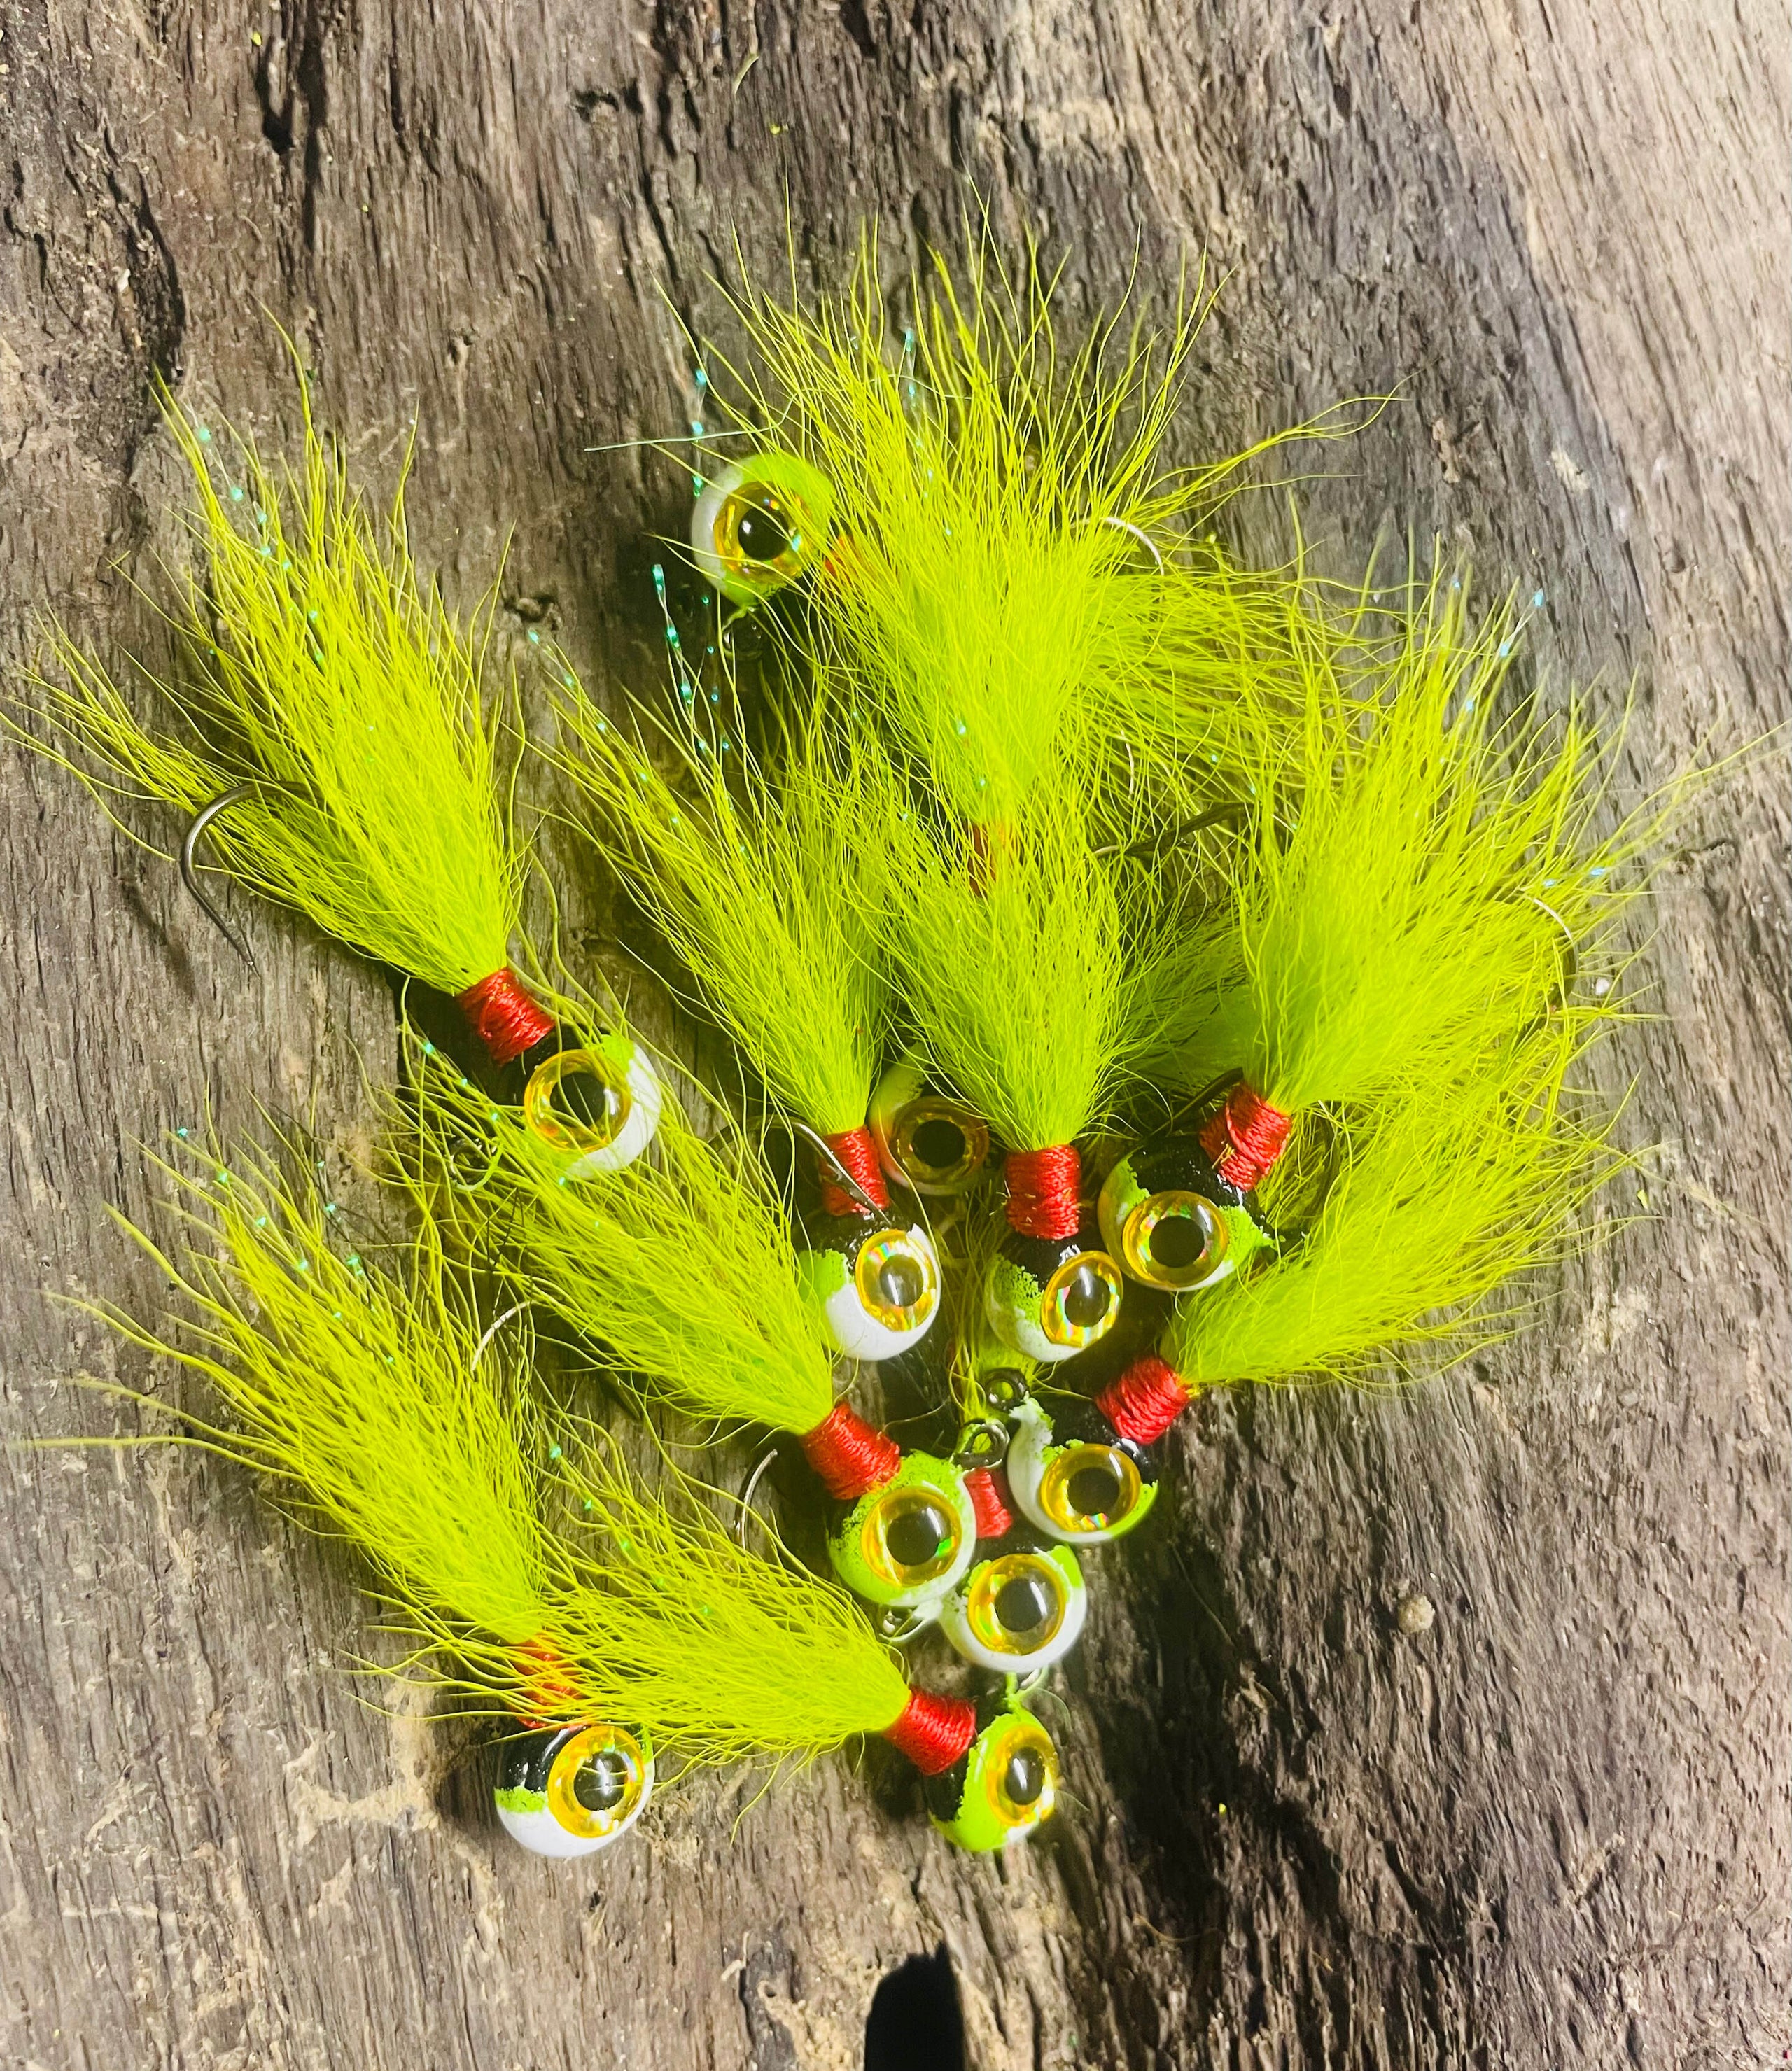 CRAPPIE JIGS I'VE TIED #1  Fly fishing flies pattern, Crappie